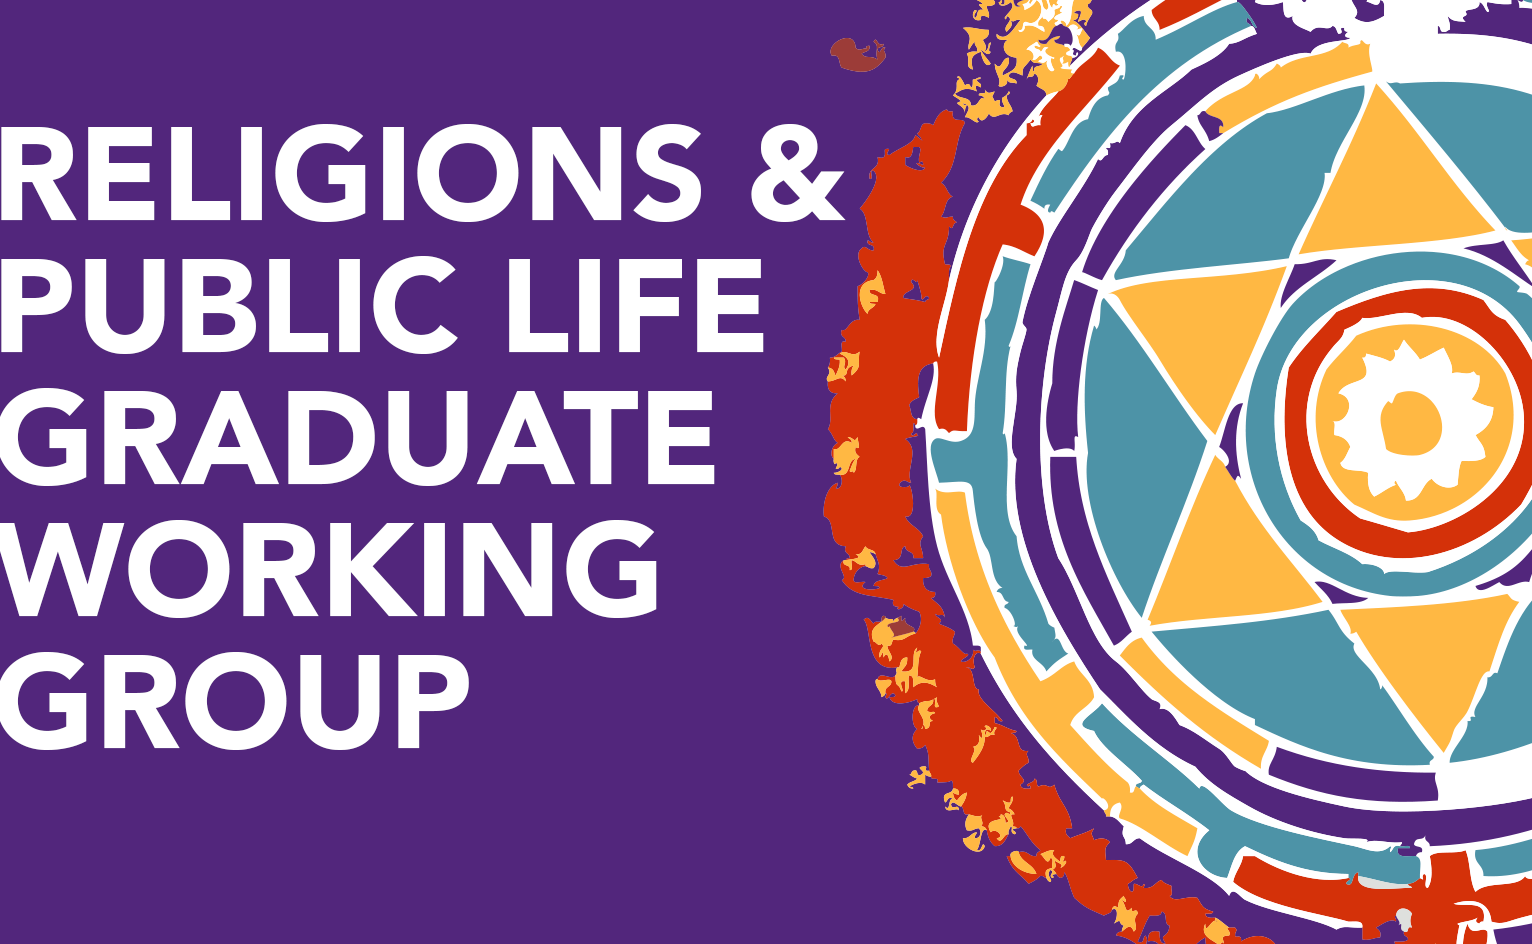 religions & public life grad working group tile. Purple background with a star-shaped mandala in background